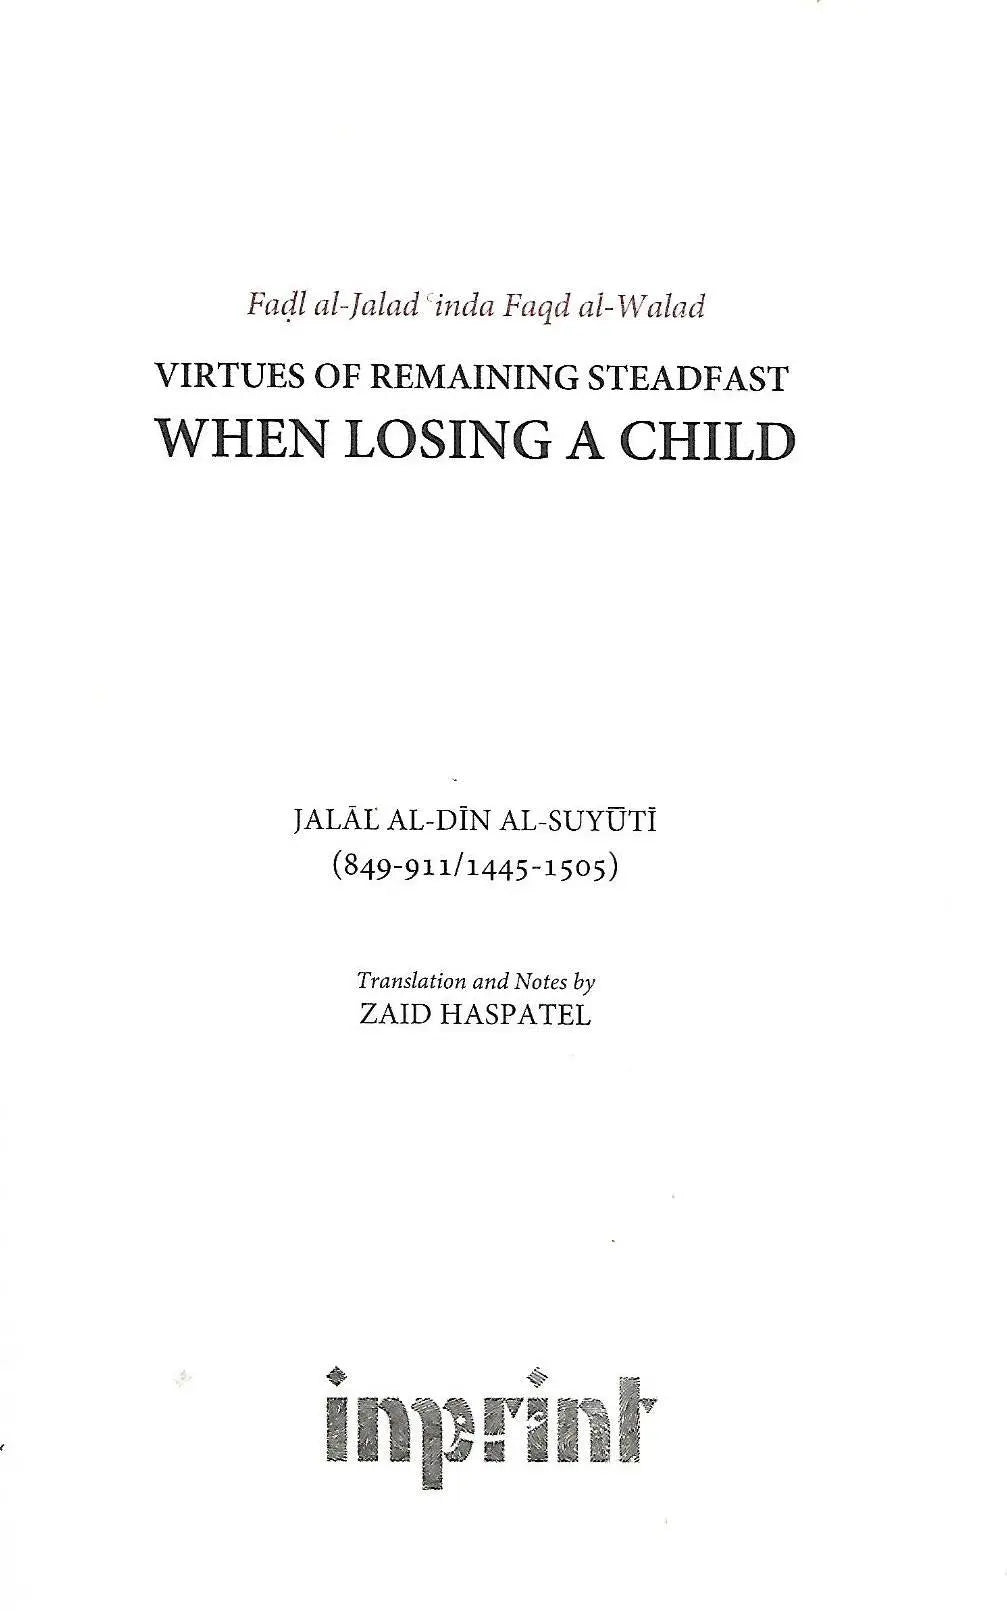 Thie Virtue of Remaining Steadfast When losing a Child